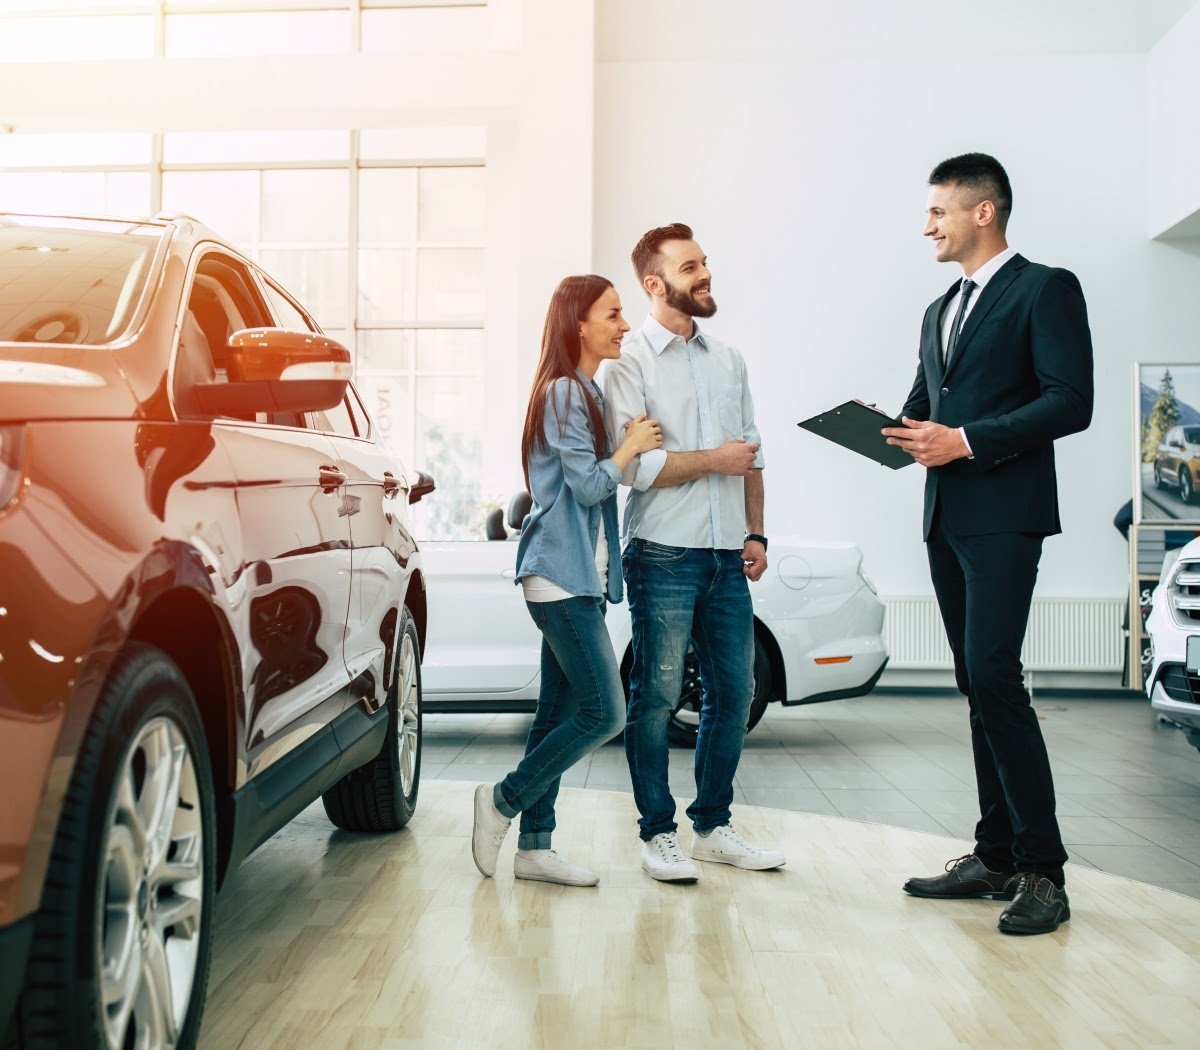 How do car dealerships attract customers? 5 ways to get leads.